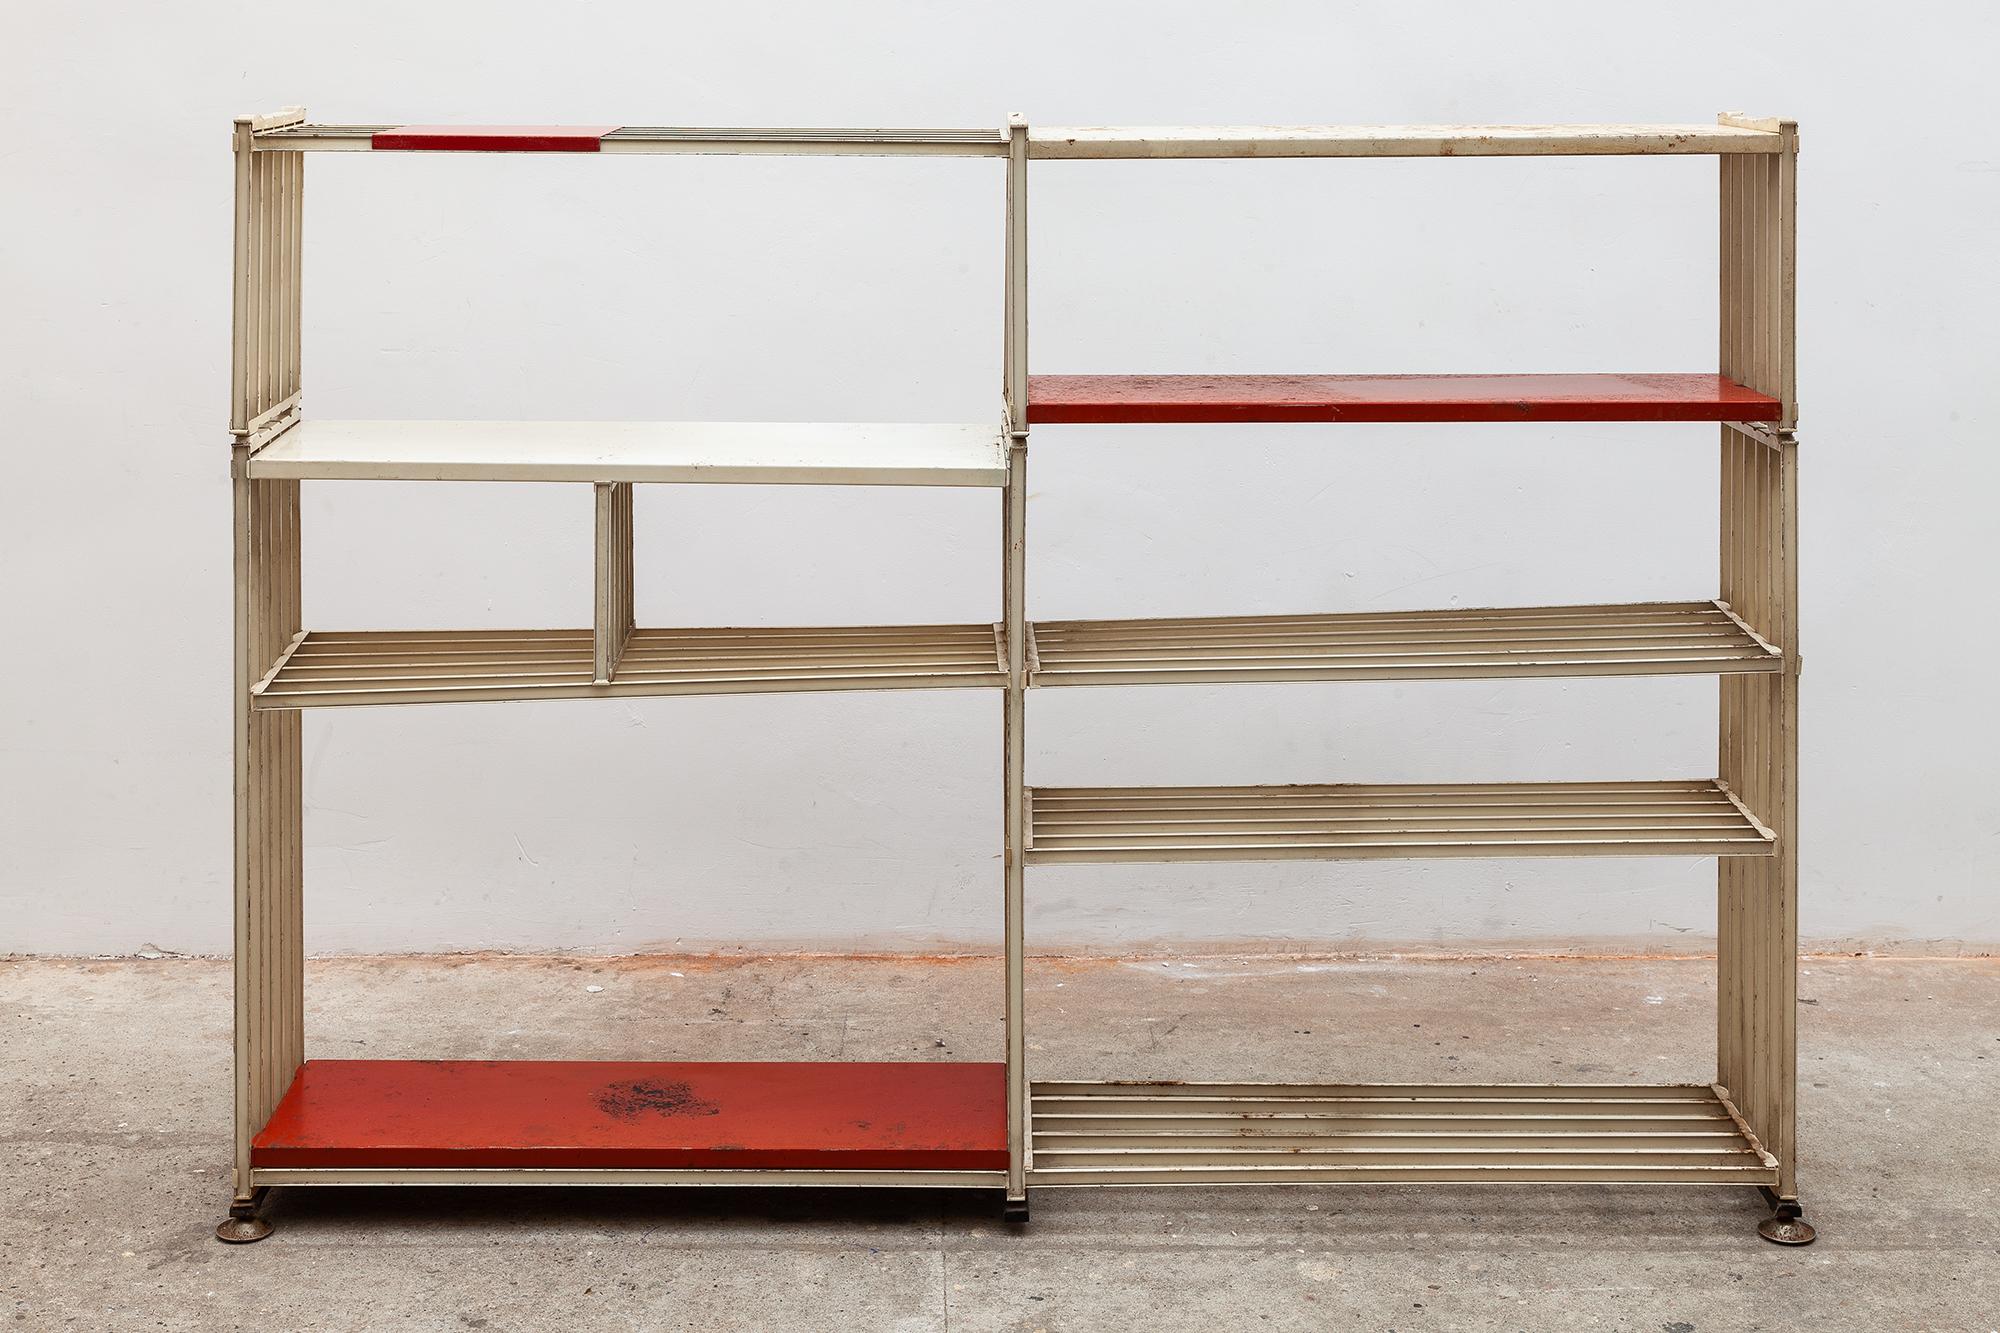 Pilastro wire bookshelf with original enameled metal plates in white and red. In original condition with visible signs of wear and some paint loss and minimal surface rust. The shelves can be adjusted in height.